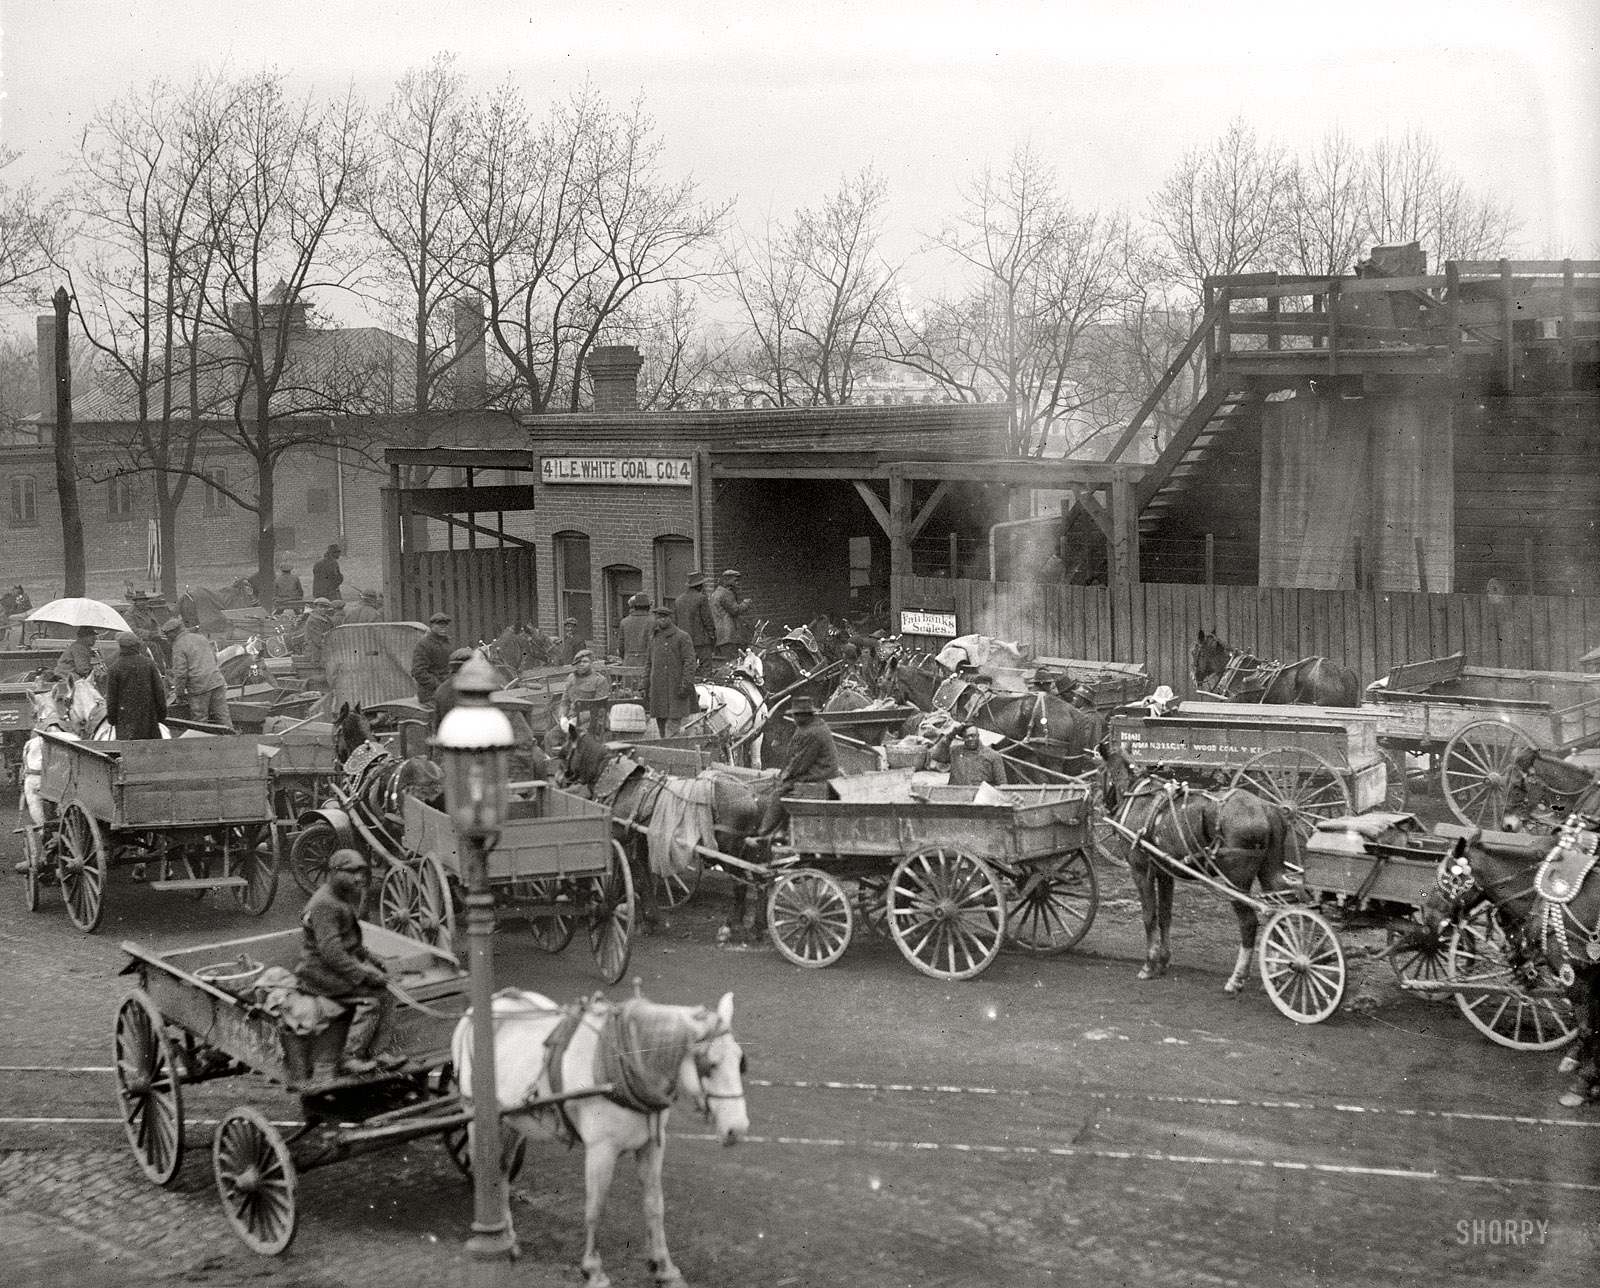 December 7, 1922. The L.E. White Coal Co. yards at South Capitol and I streets in Washington. National Photo Company Collection glass negative. View full size.